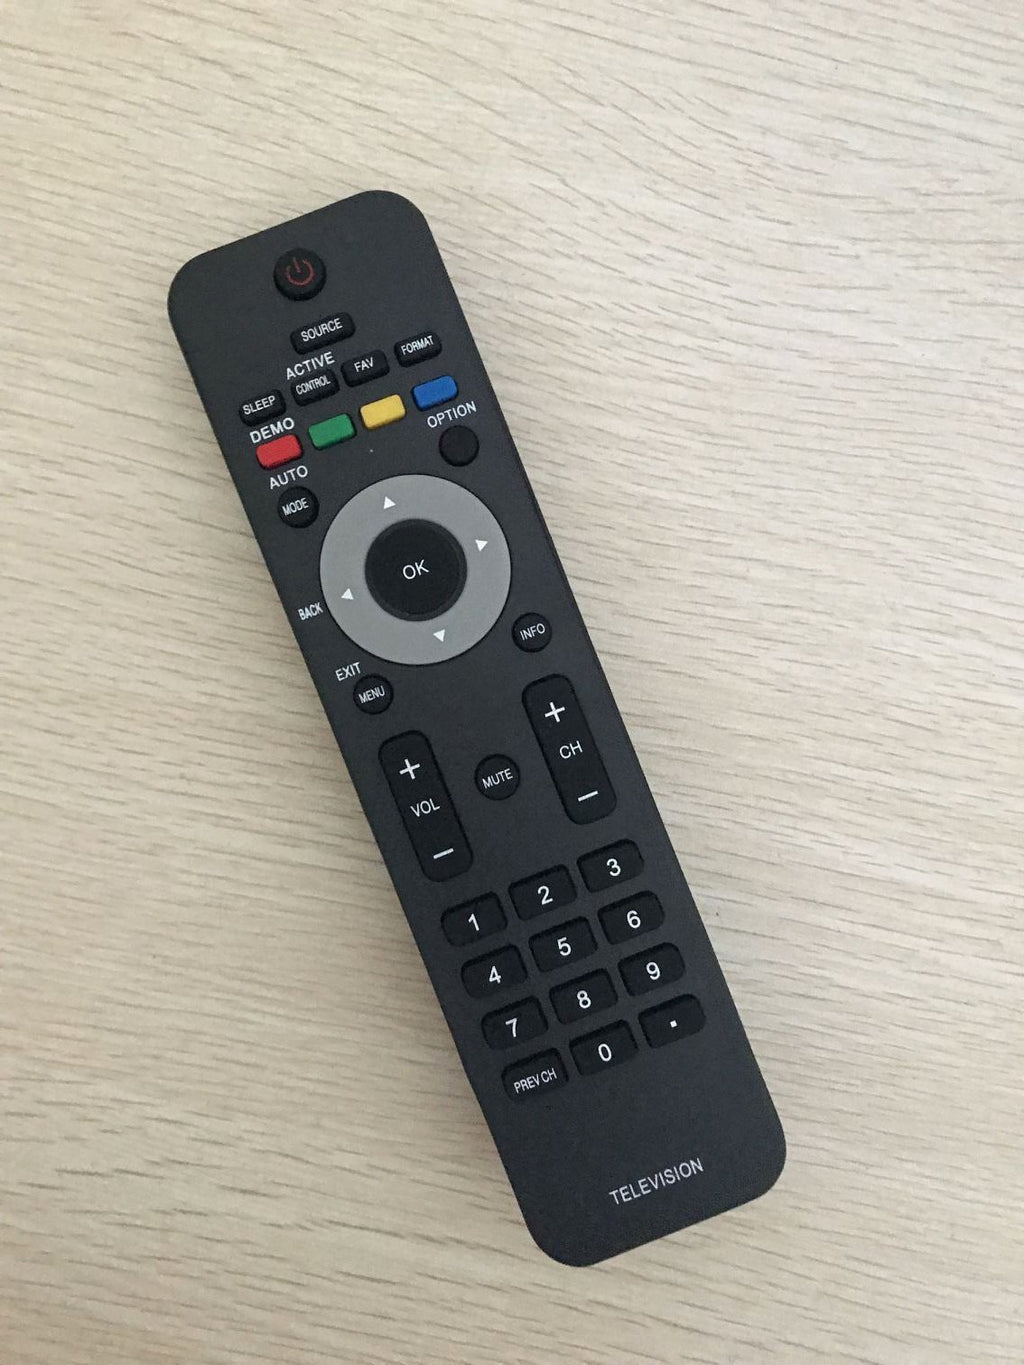 New Replacement Remote Control for Philips TV 19PFL3504D/F7 19PFL3505D/F7 19PFL4505D/F7 19PFL3403D/27